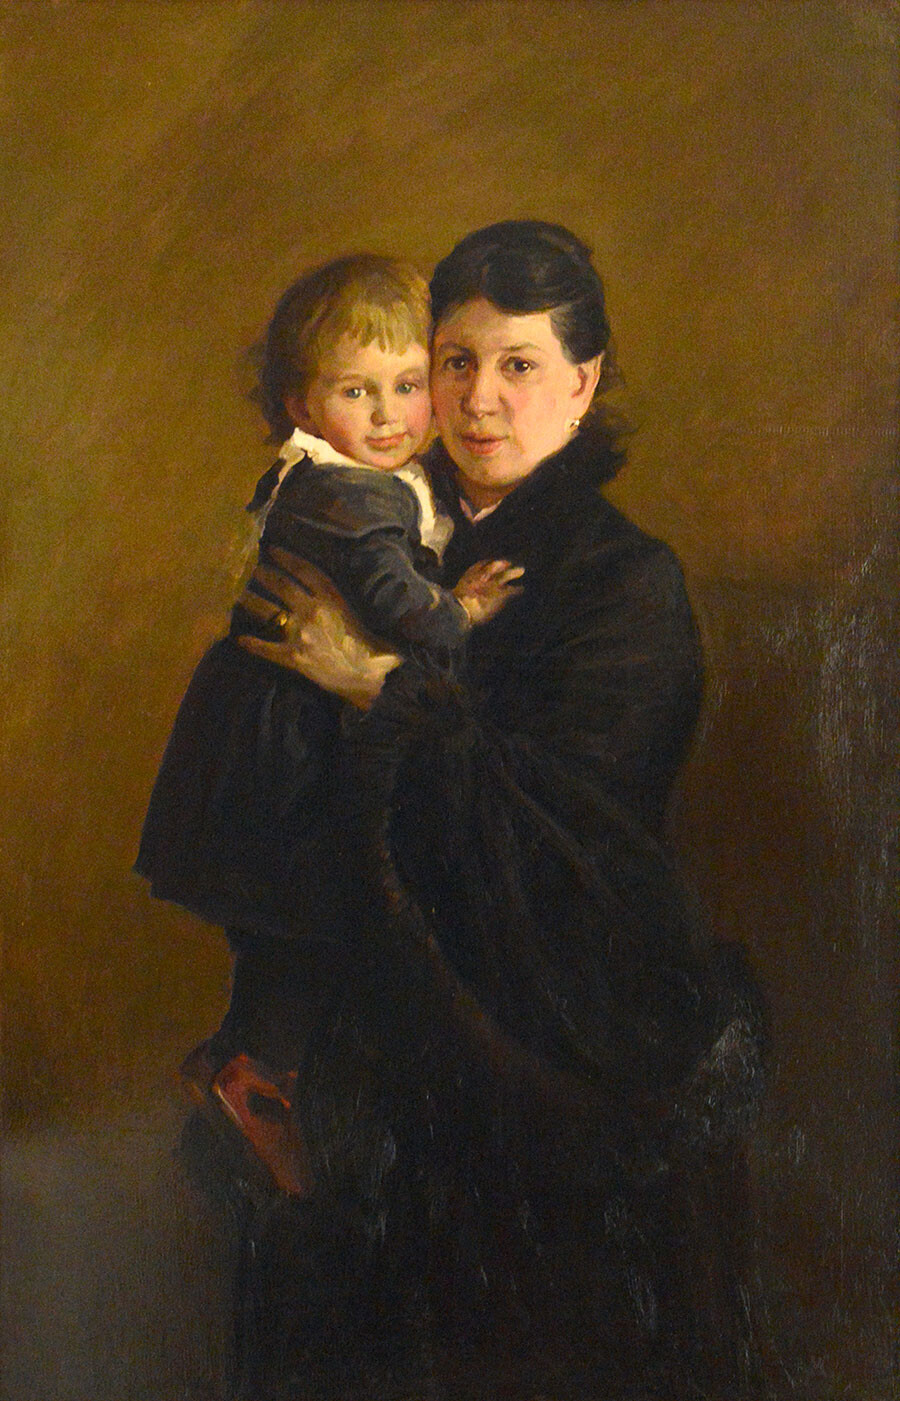 Portrait of countess Sophia Tolstaya (1844-1919), with daughter Alexandra. Found In The Collection Of State Museum Of Leo Tolstoy, Moscow.